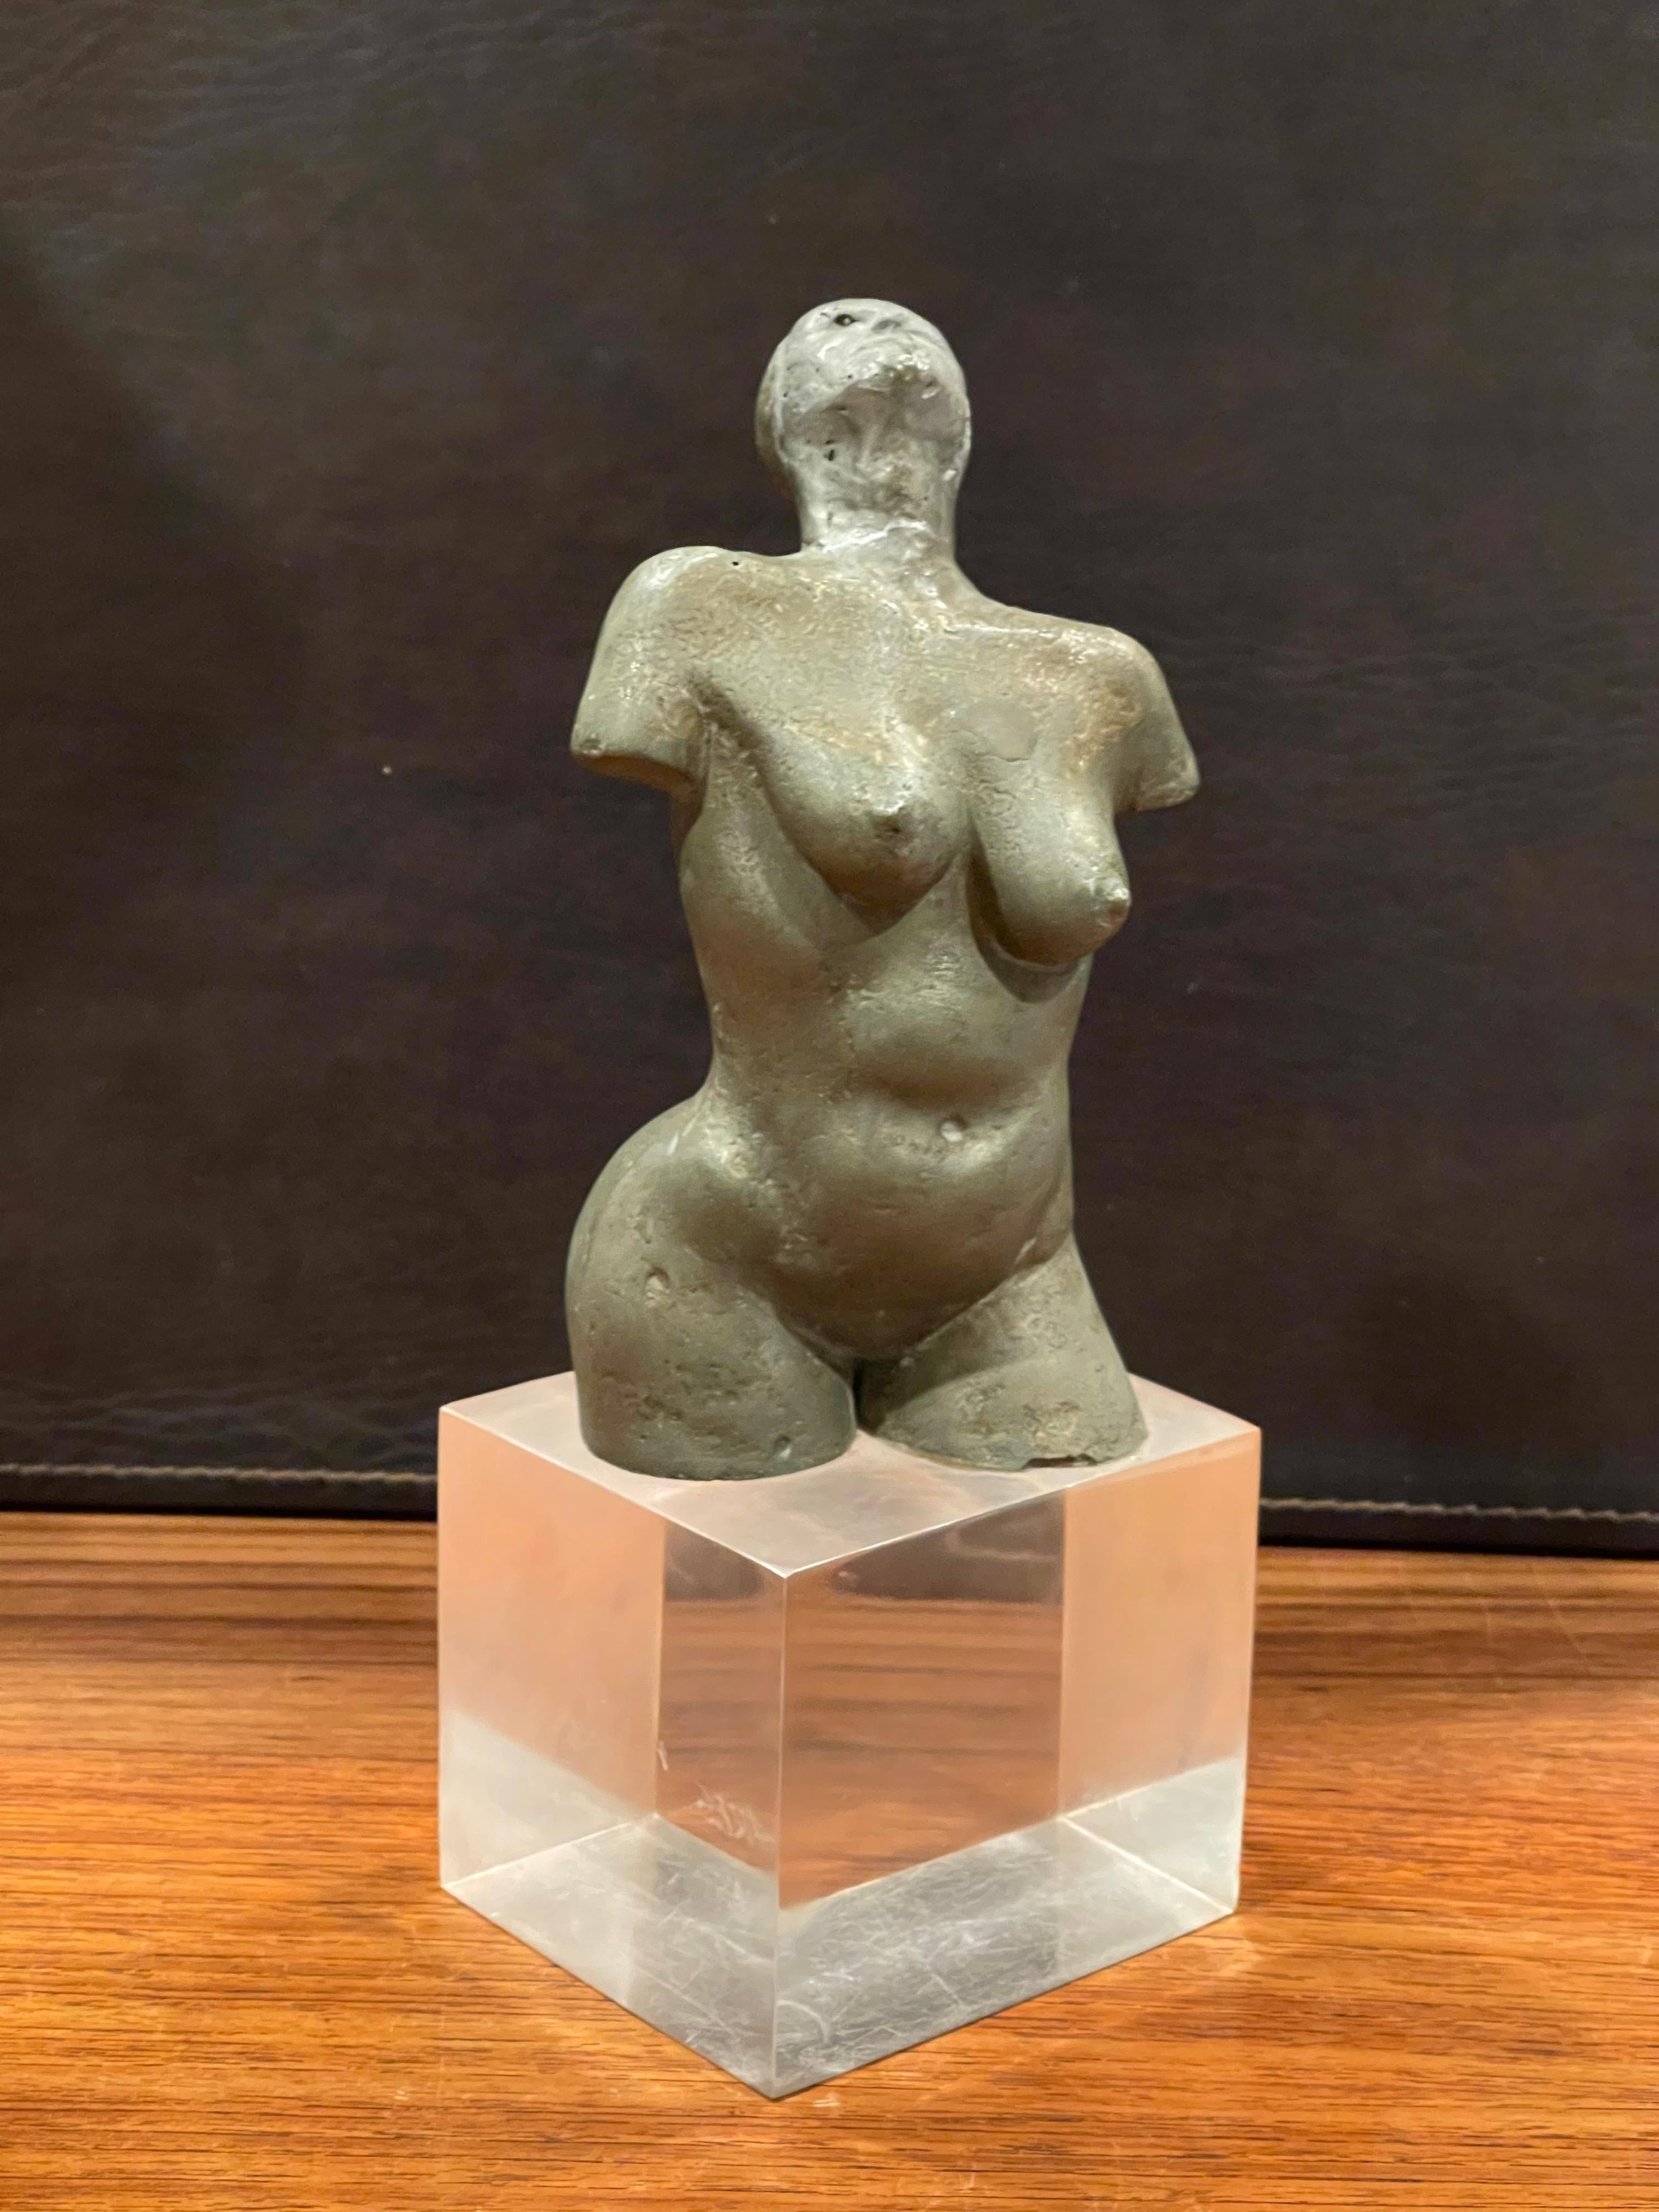 Mid-century abstract nude sculpture on lucite base by listed California artist Ken Vares, circa 1960s. The piece is made of a porous metal, possibly aluminum, well detailed and signed on the base. This very cool and eclectic piece is in good vintage